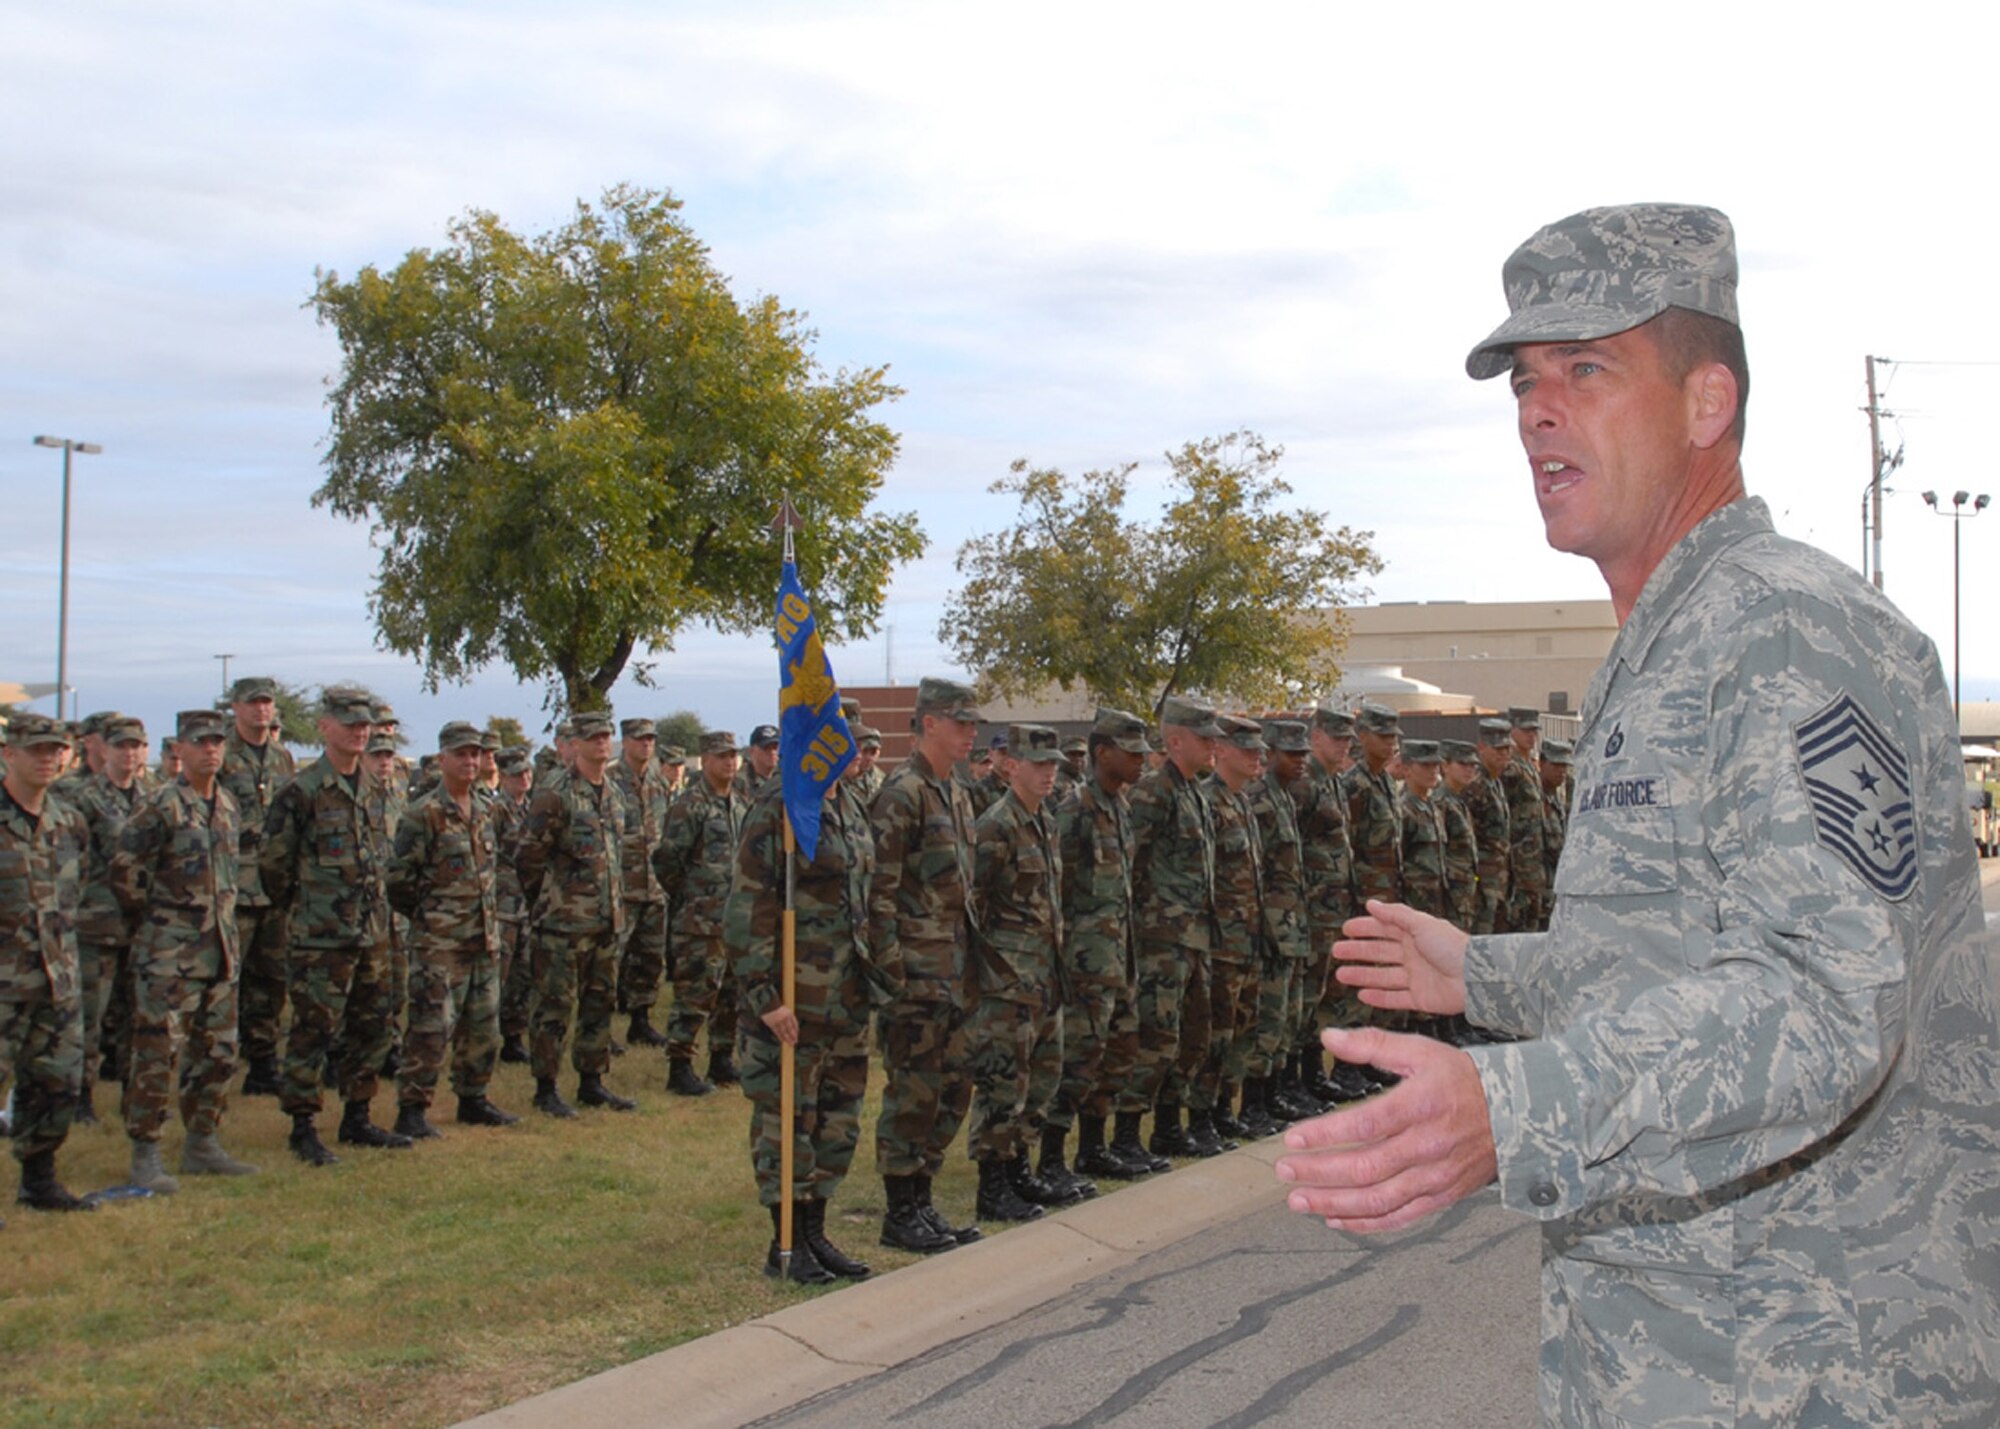 Chief Master Sgt. Paul Moreau, 17th Training Wing command chief master sergeant, talks to members of the 315th Training Squadron moments prior to end of the duty-day Nov. 11, 2007. Chief Moreau has been selected to serve as the new command chief for 2nd Air Force at Keesler Air Force Base, Miss. (U.S. Air Force photo by Tech. Sgt. Gina O’Bryan)